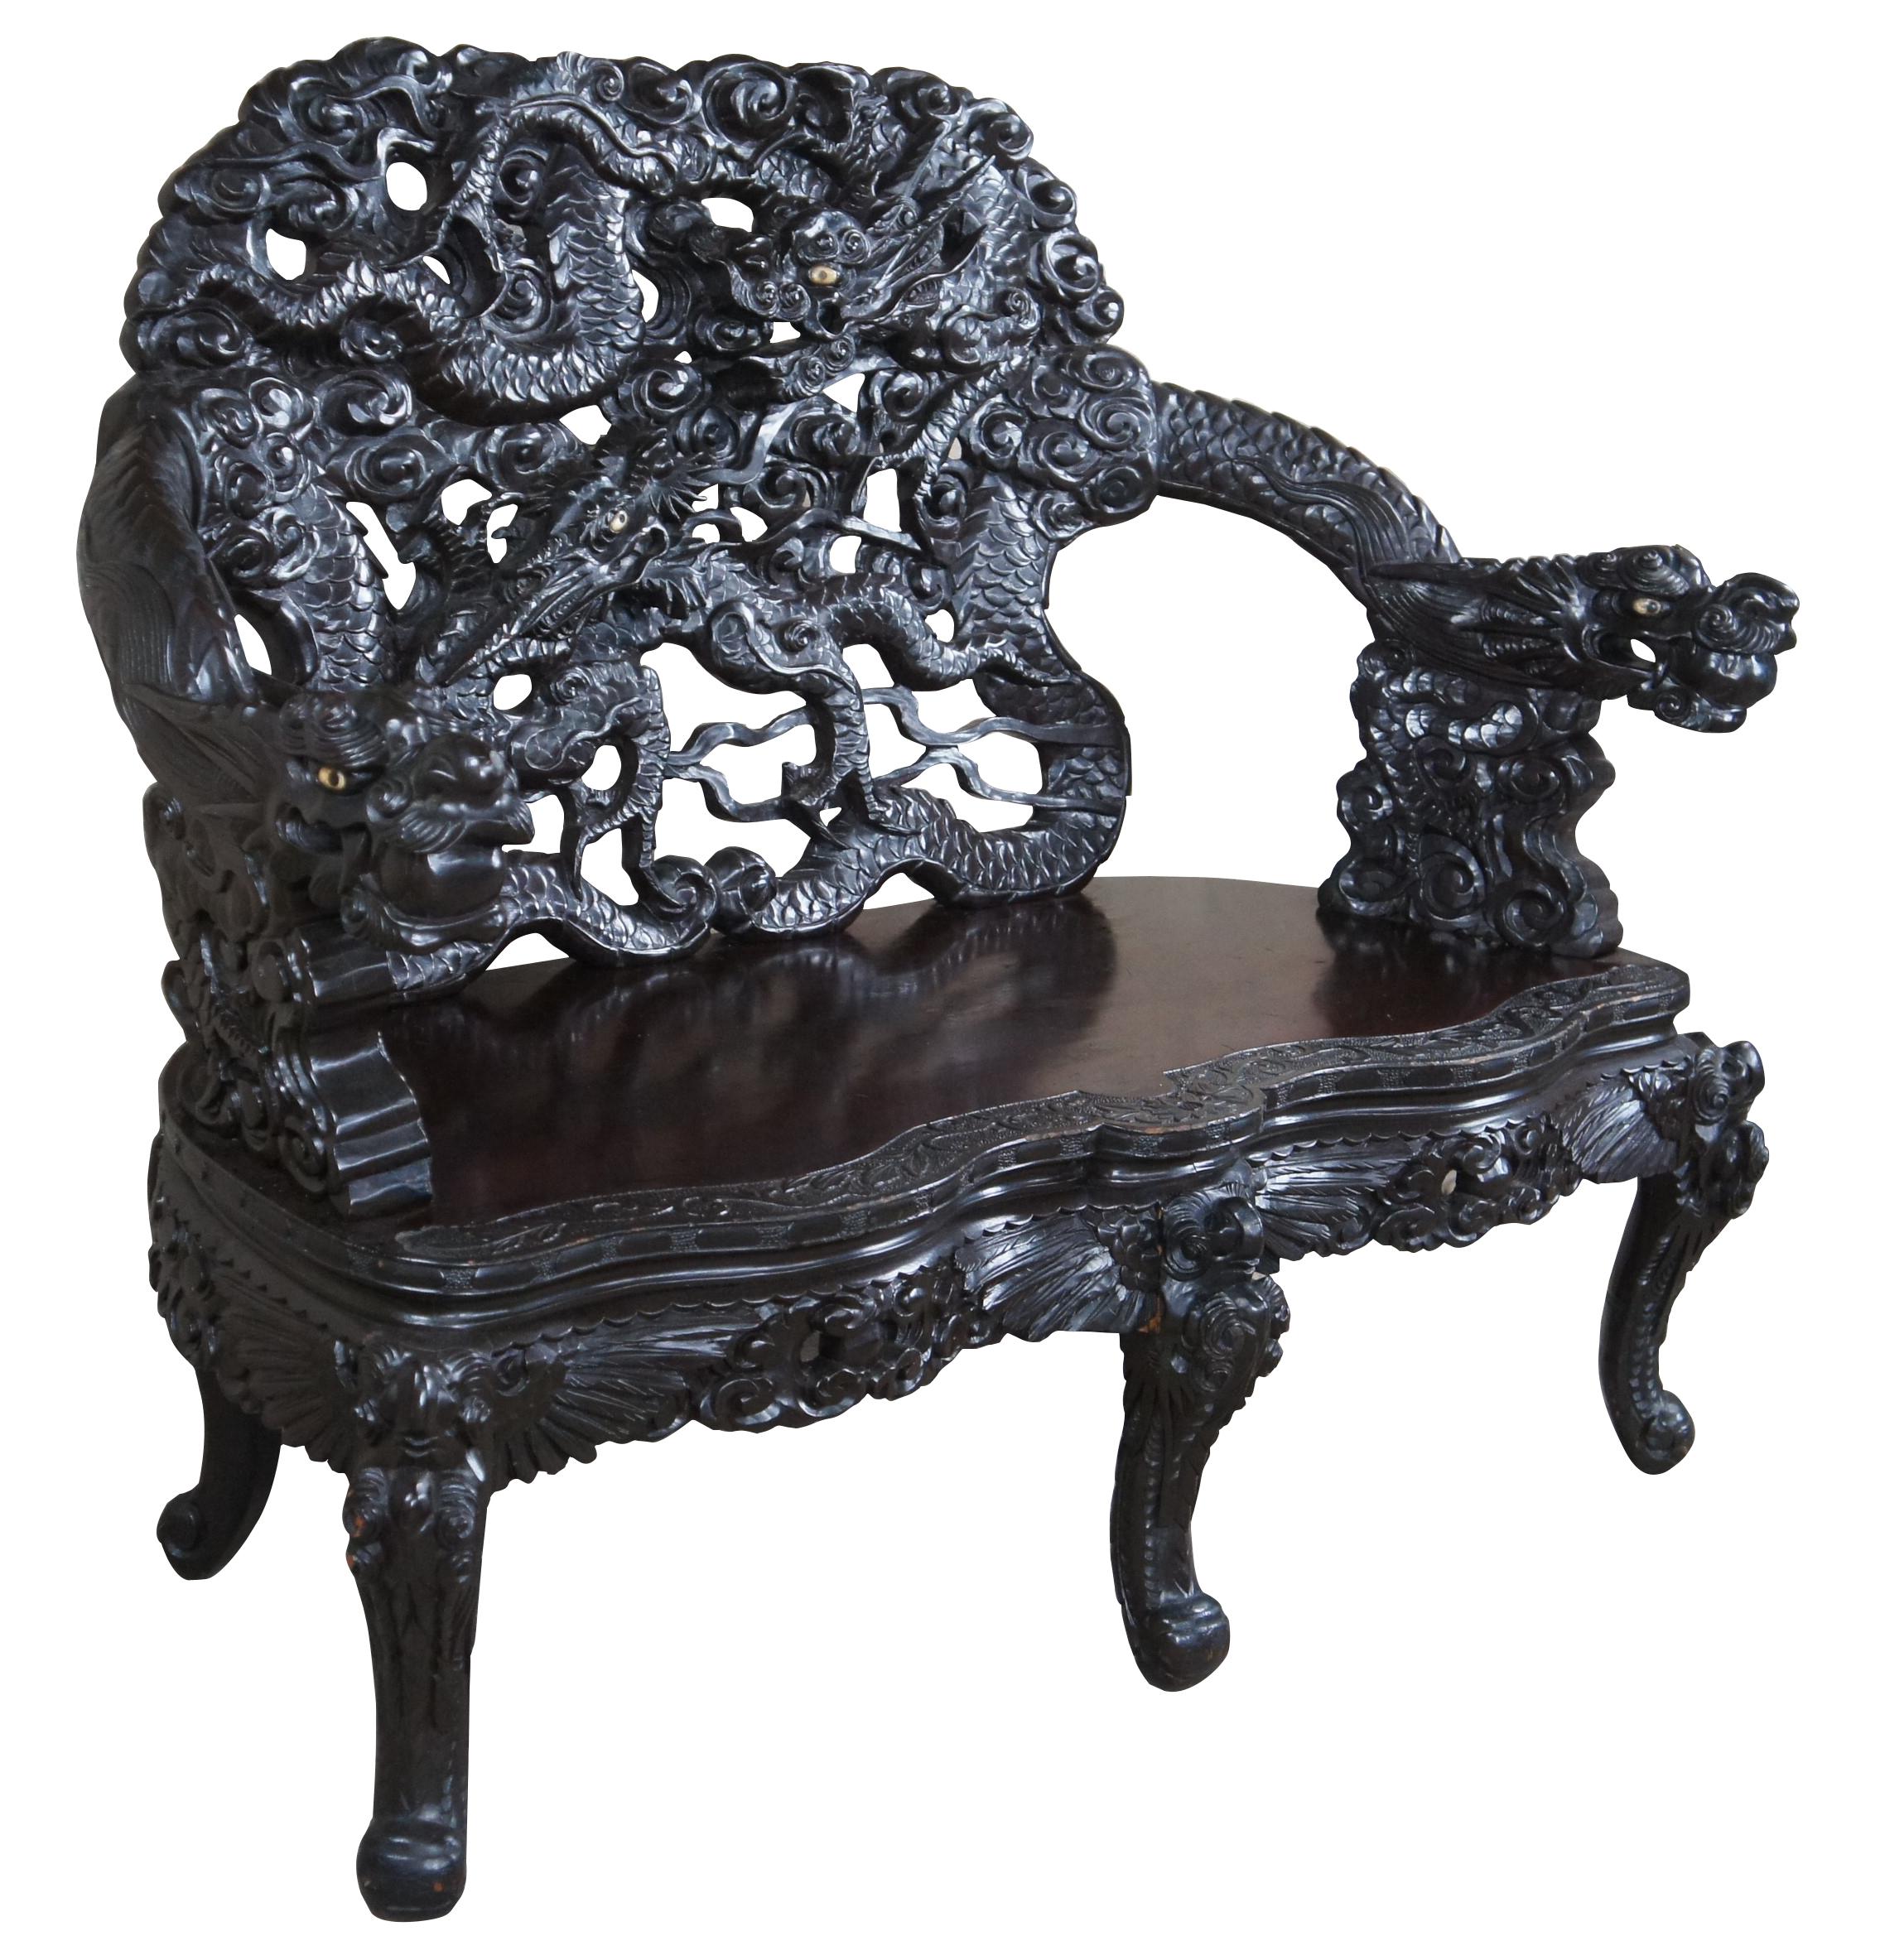 A fine and impressive Imperial Japanese Meiji Period Ebonized Rosewood Dragon Bench. Features high relief carving throughout. The arched and pierced back consists of 4 dragons. In the center are two large and intricate snarling three toed dragons.